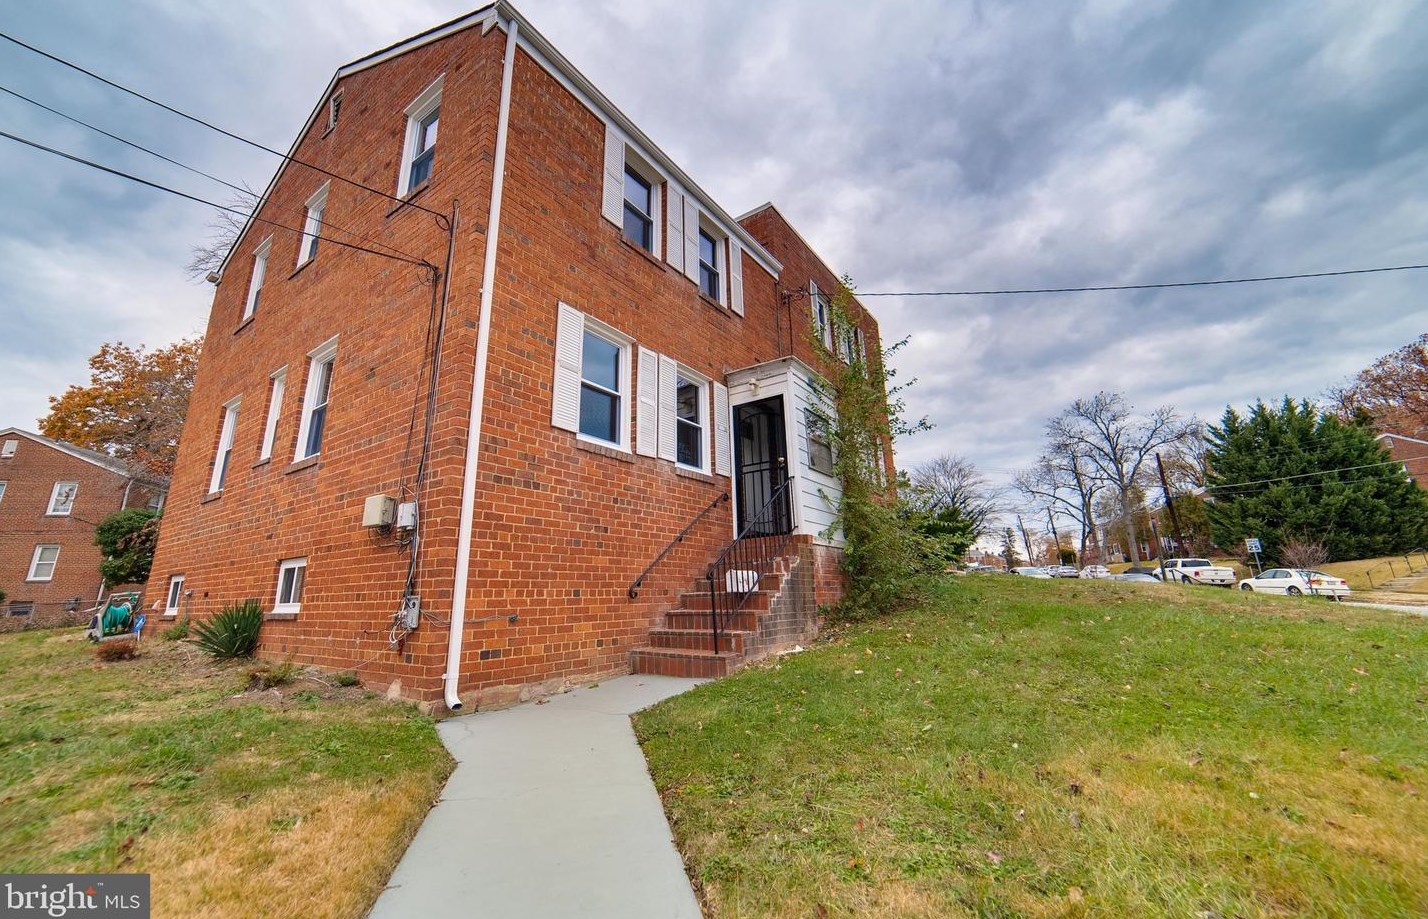 4037 Lyons St, Temple Hills, MD 20748